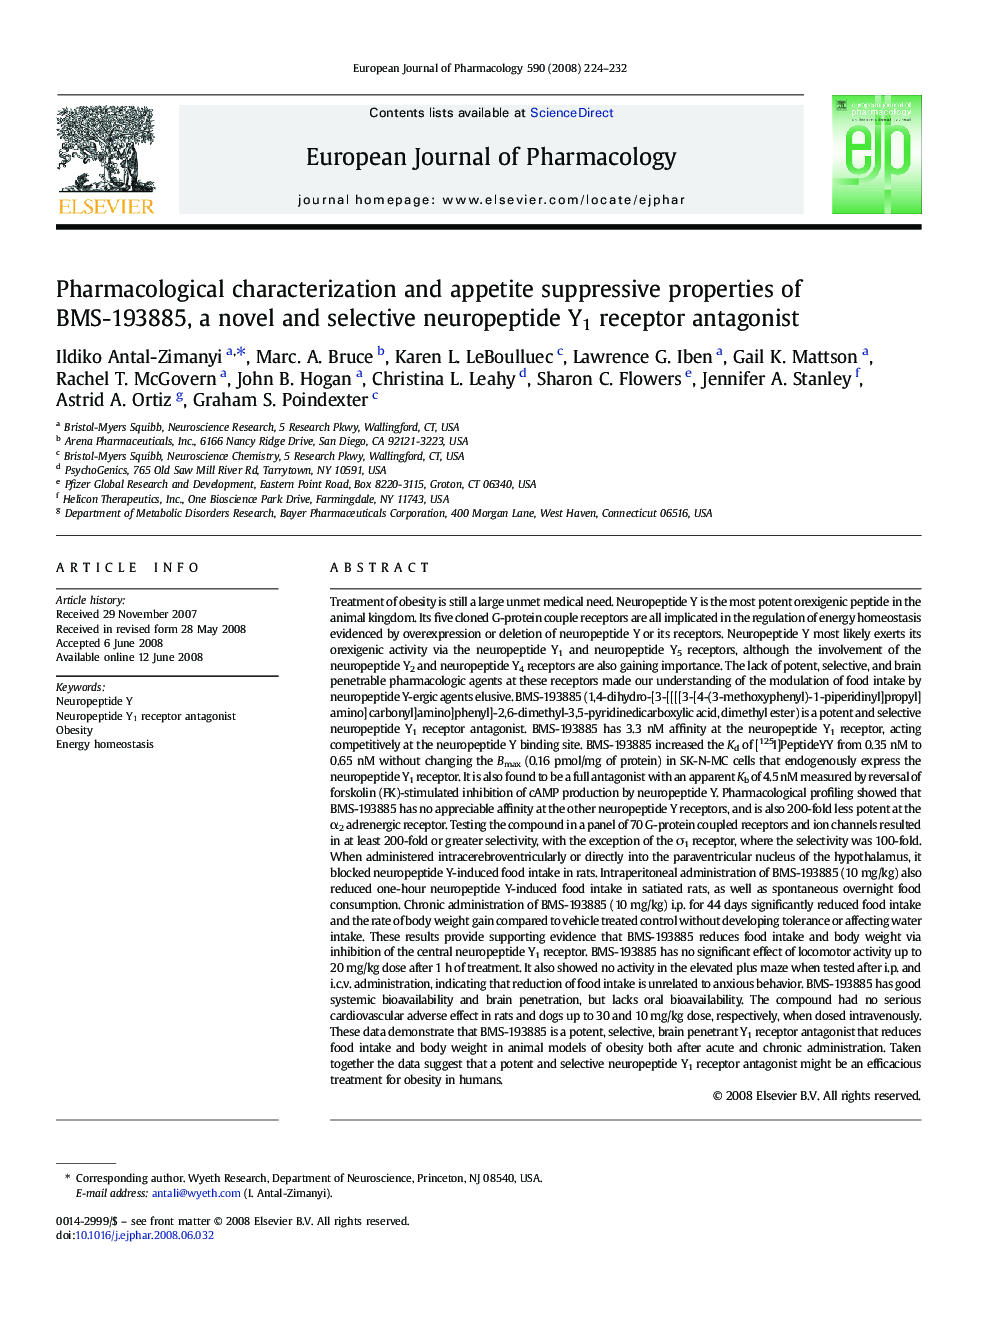 Pharmacological characterization and appetite suppressive properties of BMS-193885, a novel and selective neuropeptide Y1 receptor antagonist